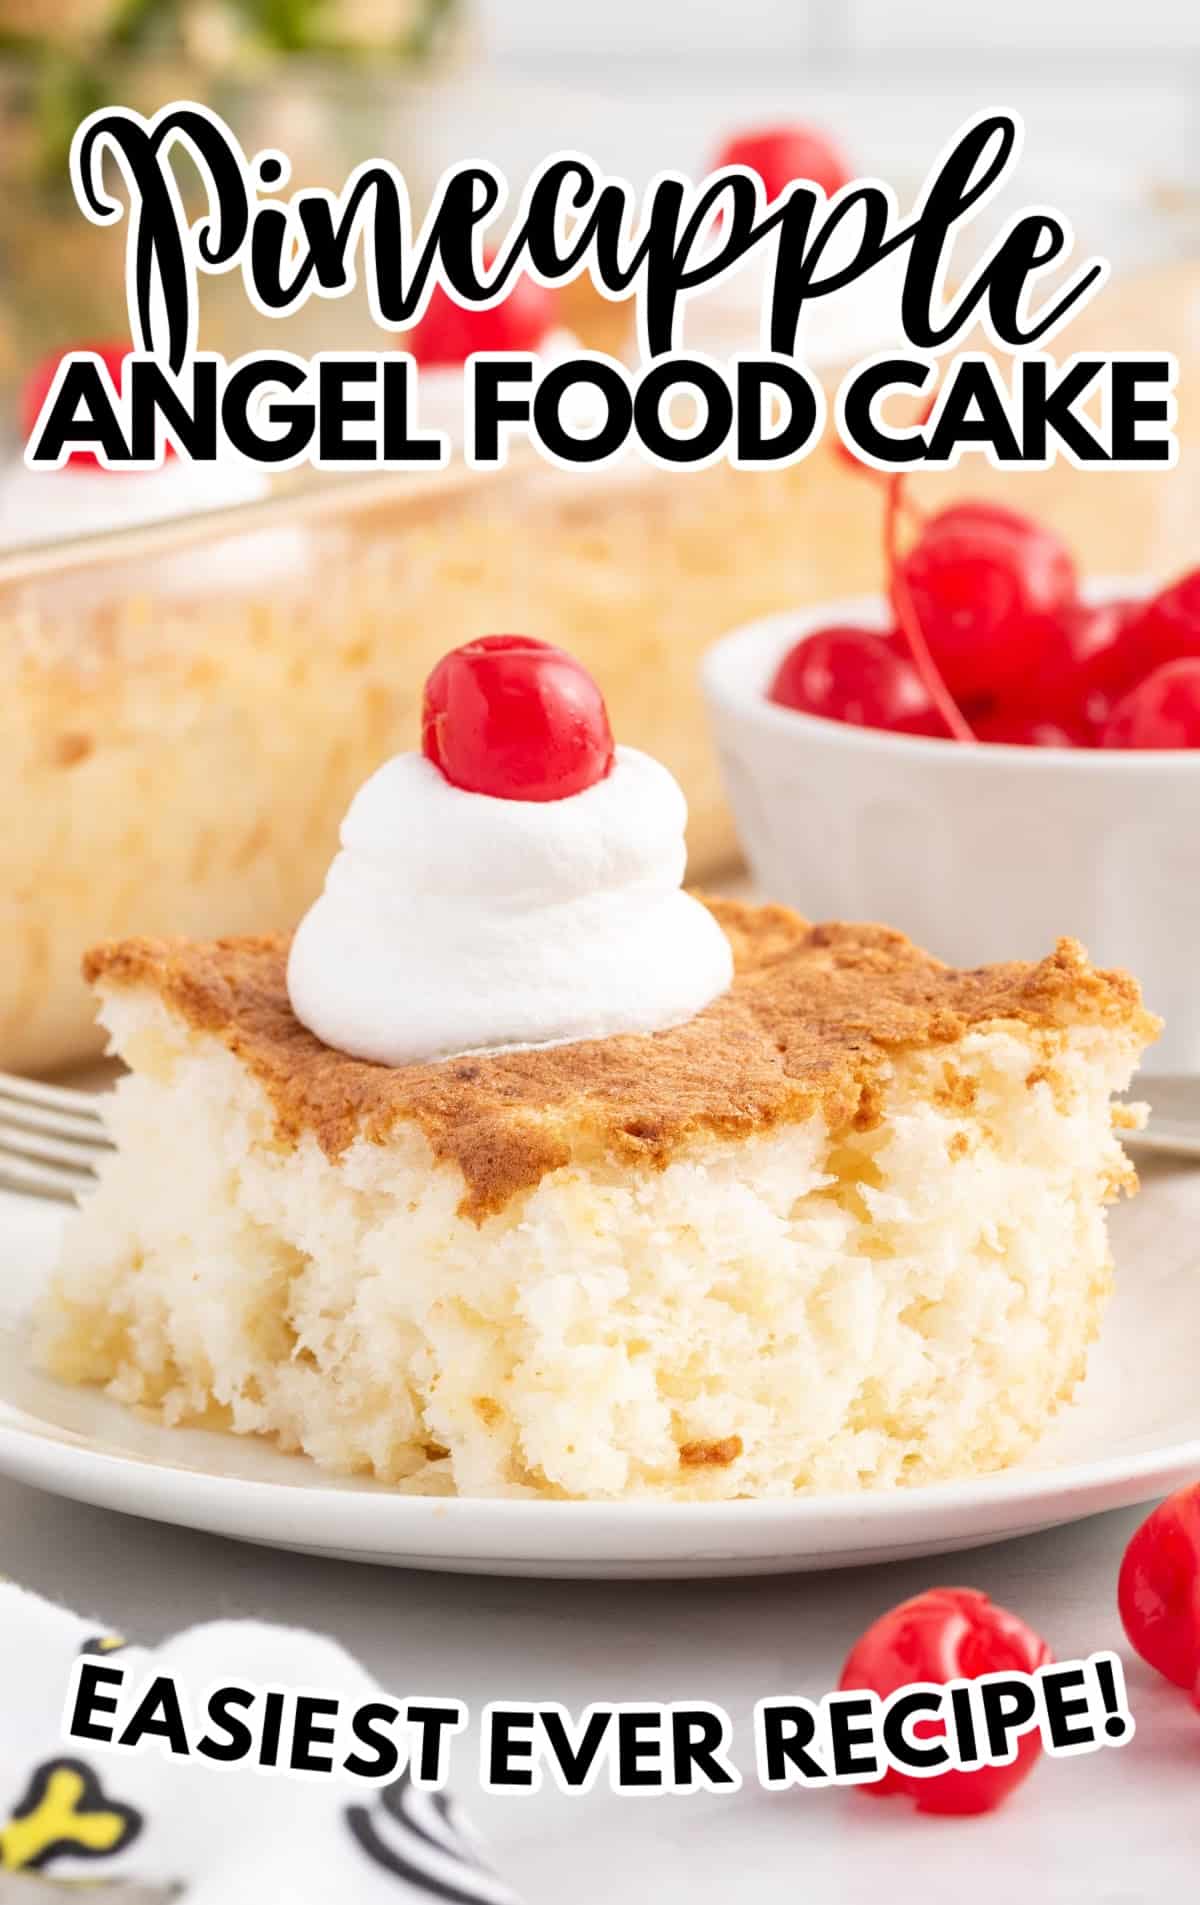 A piece of cake on a plate, with Pineapple and Angel food cake